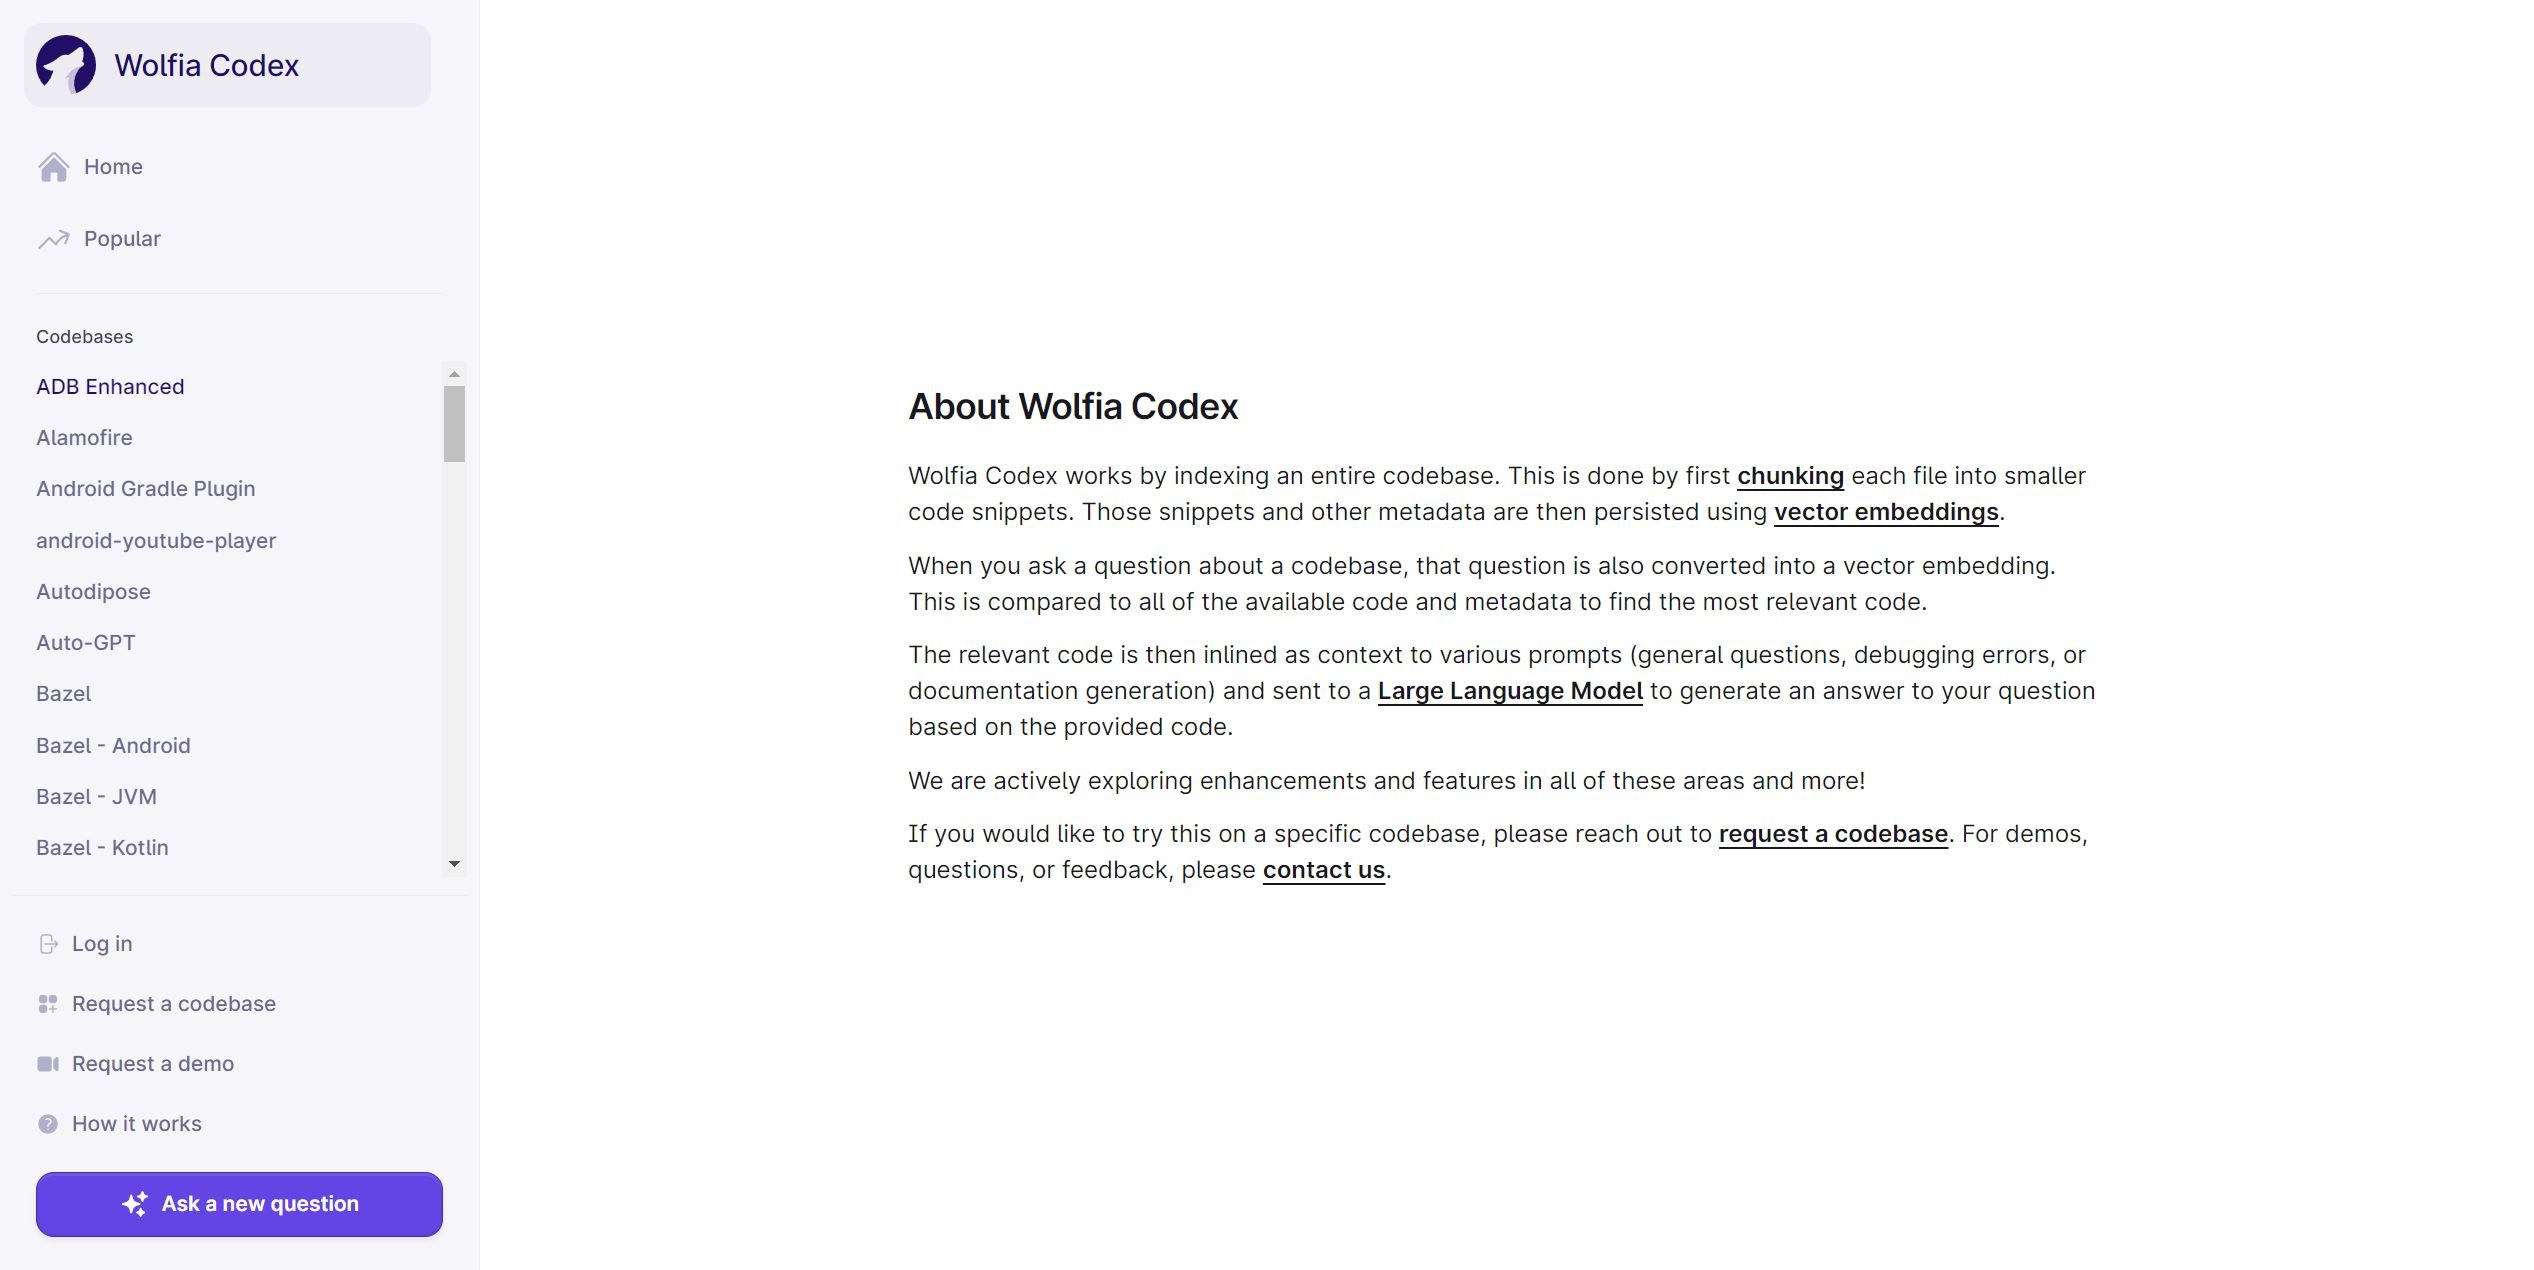  Codex by Wolfia is an AI-powered tool designed to